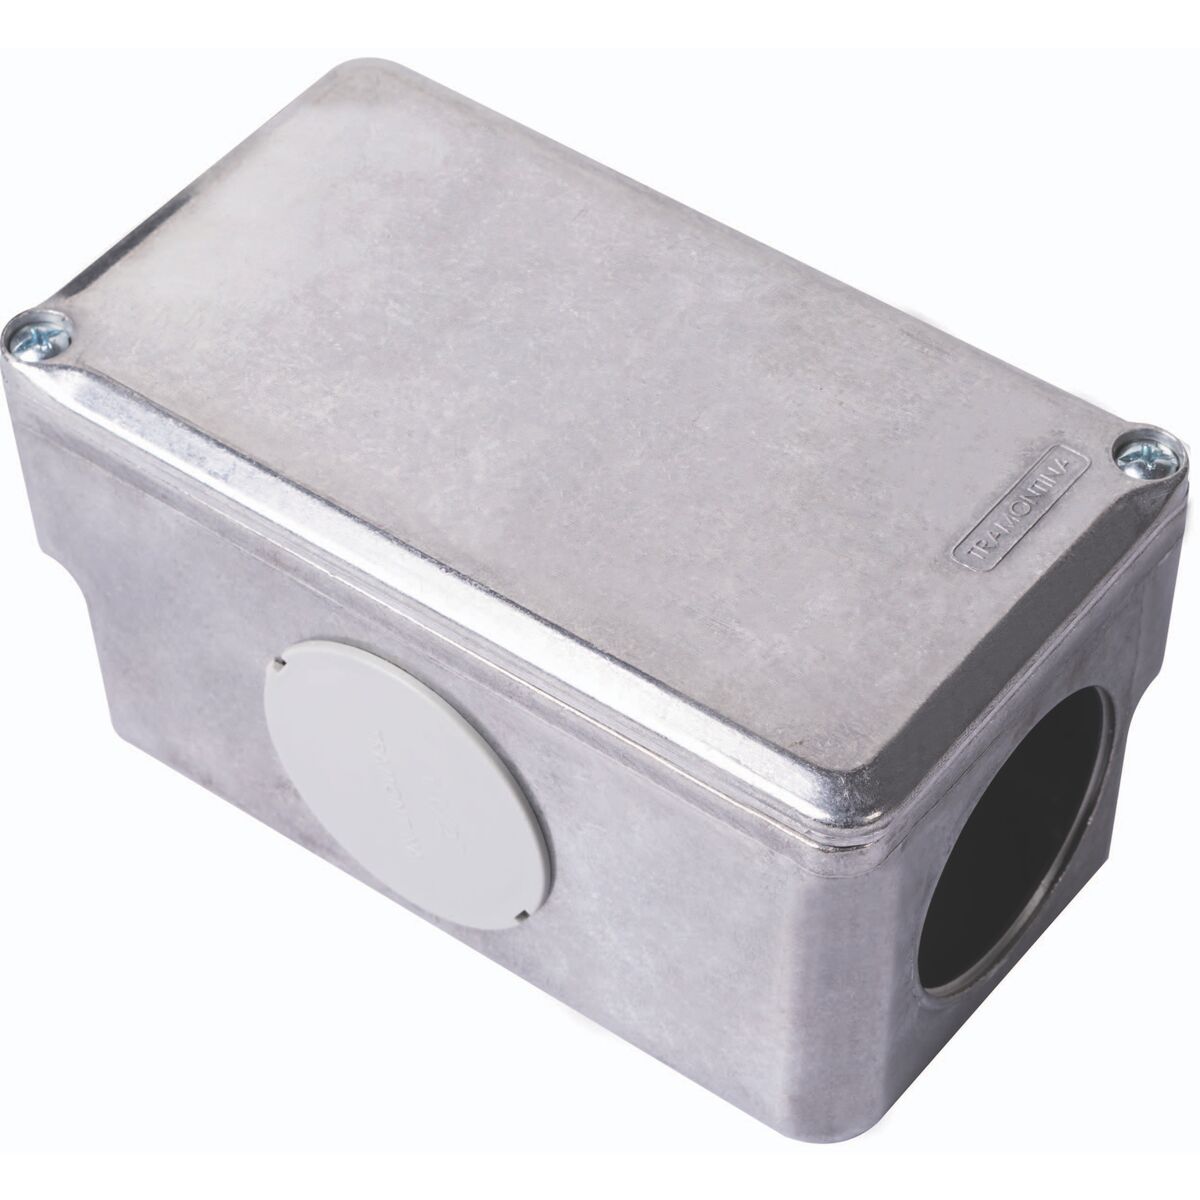 
Tramontina 1.1/2" X-Type Multiple Conduit Box with Cover
